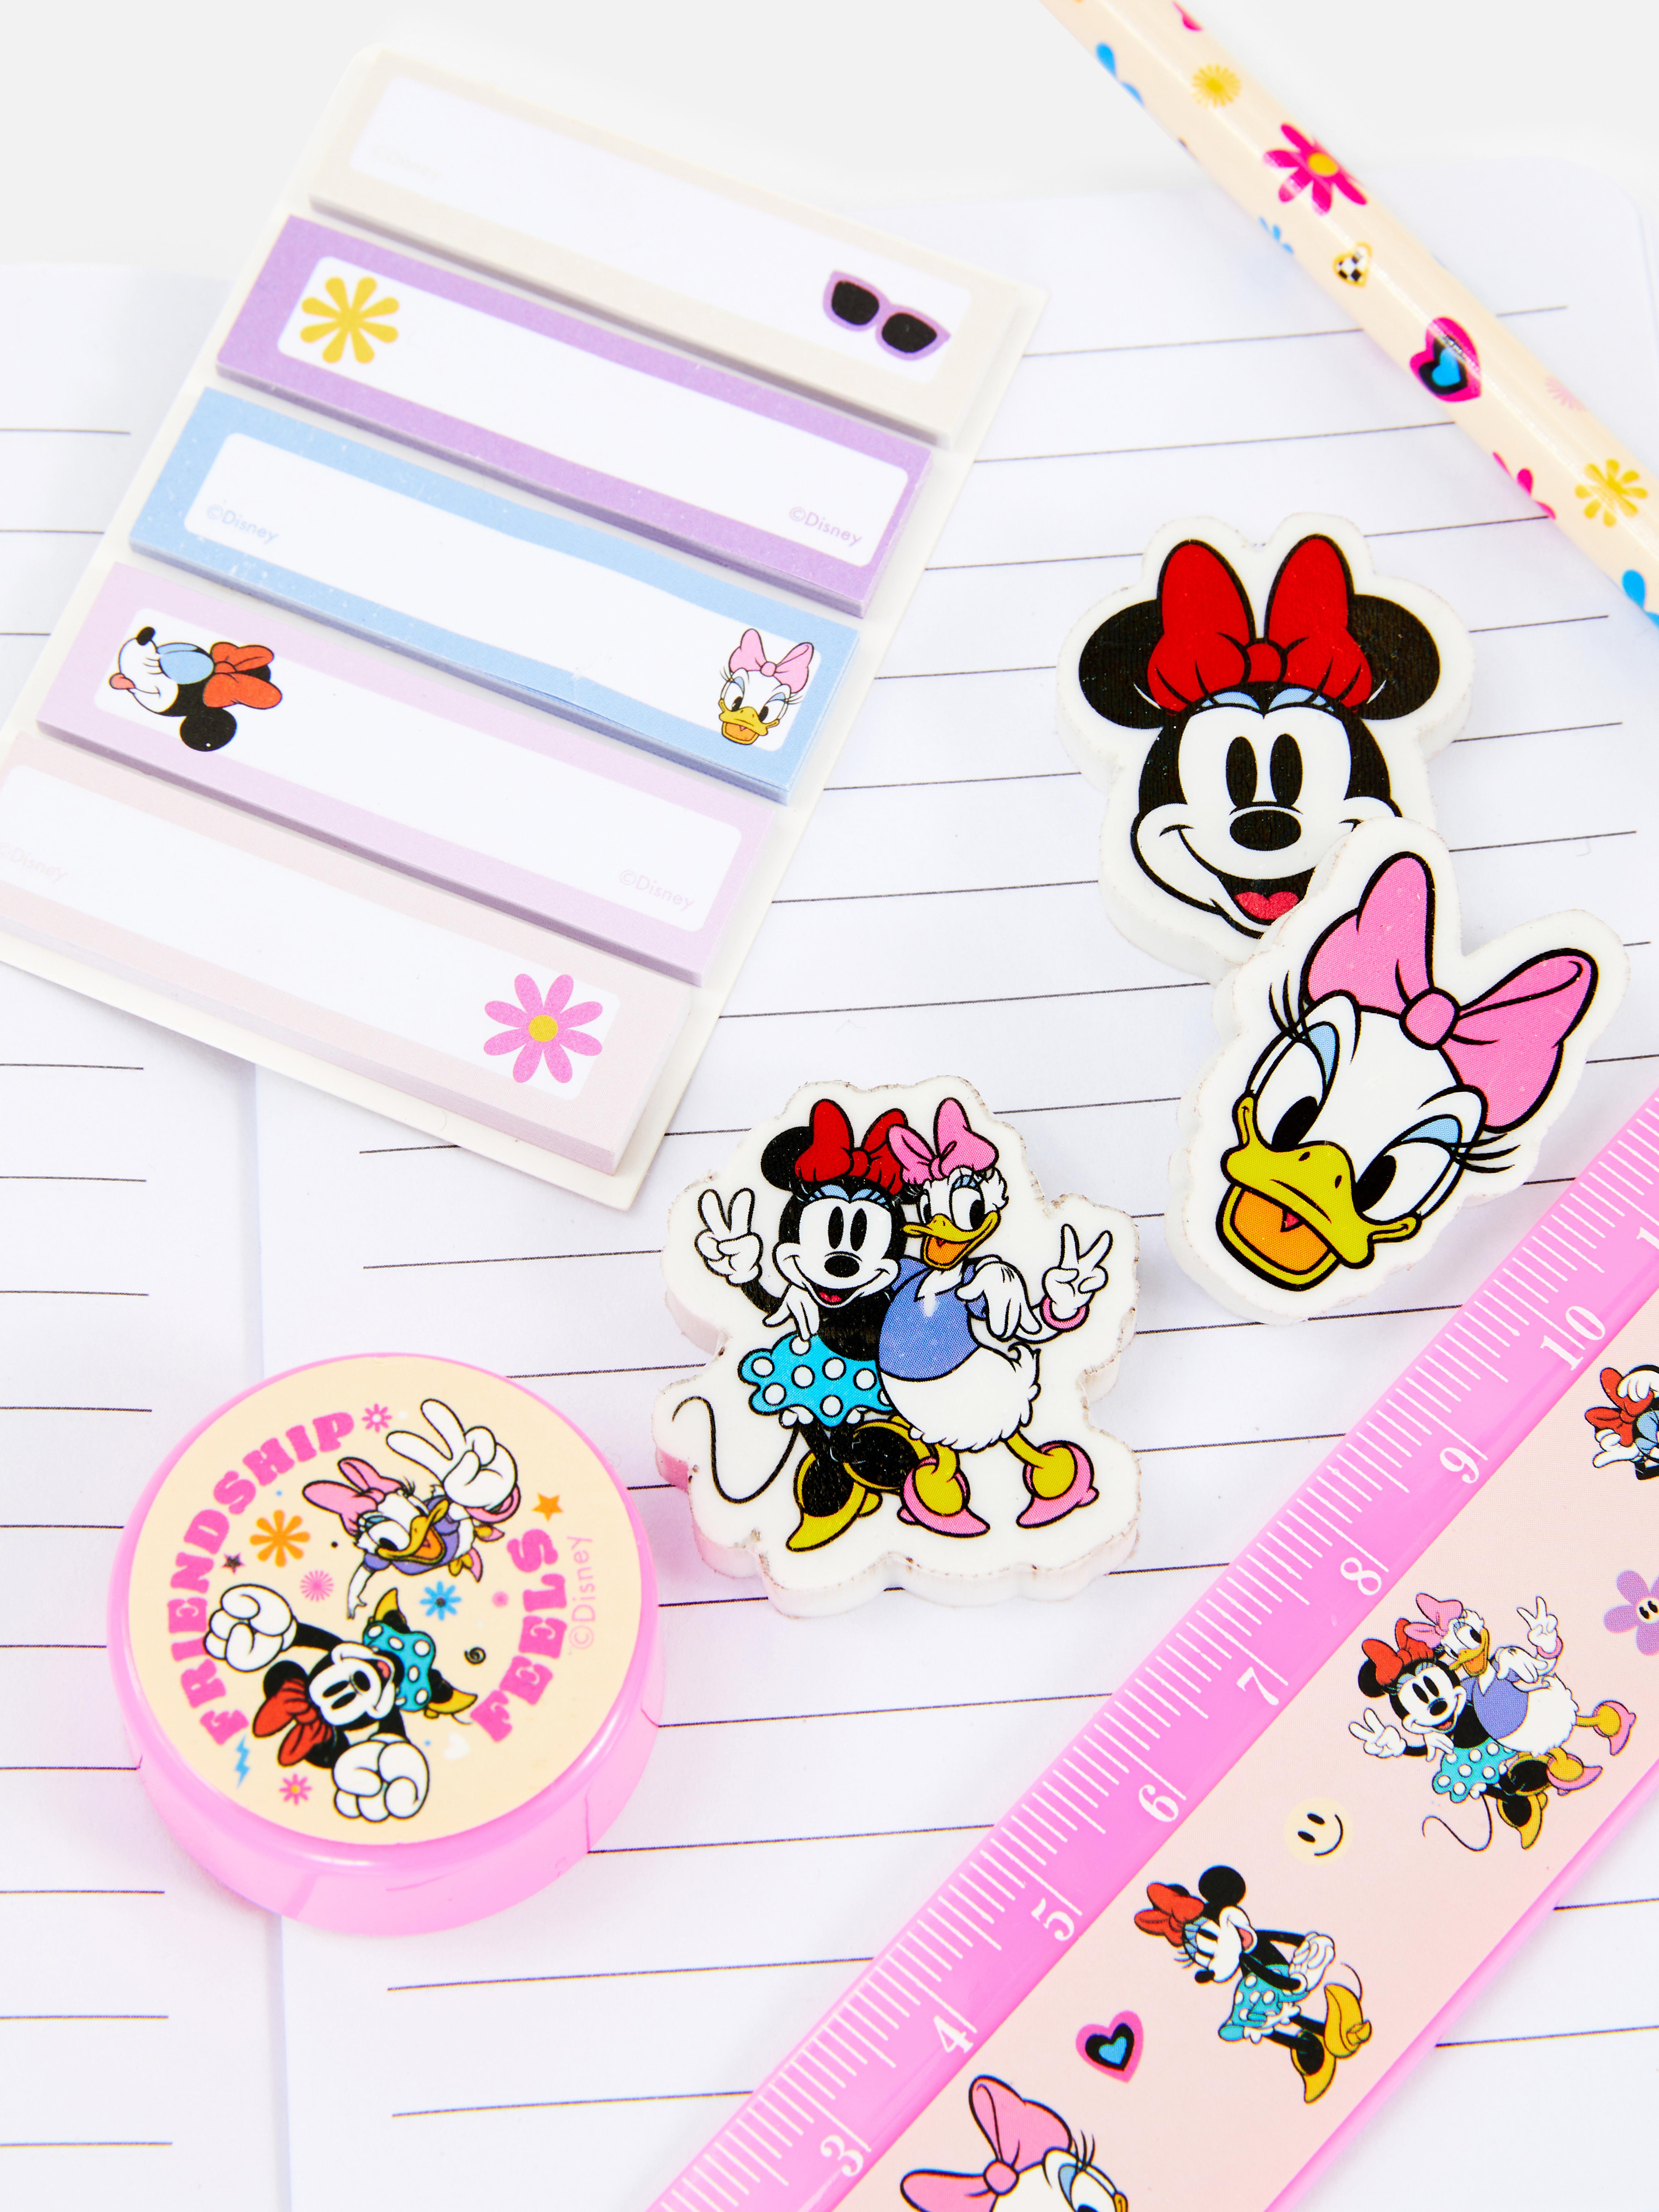 Disney’s Minnie Mouse and Daisy Duck Stationery Set